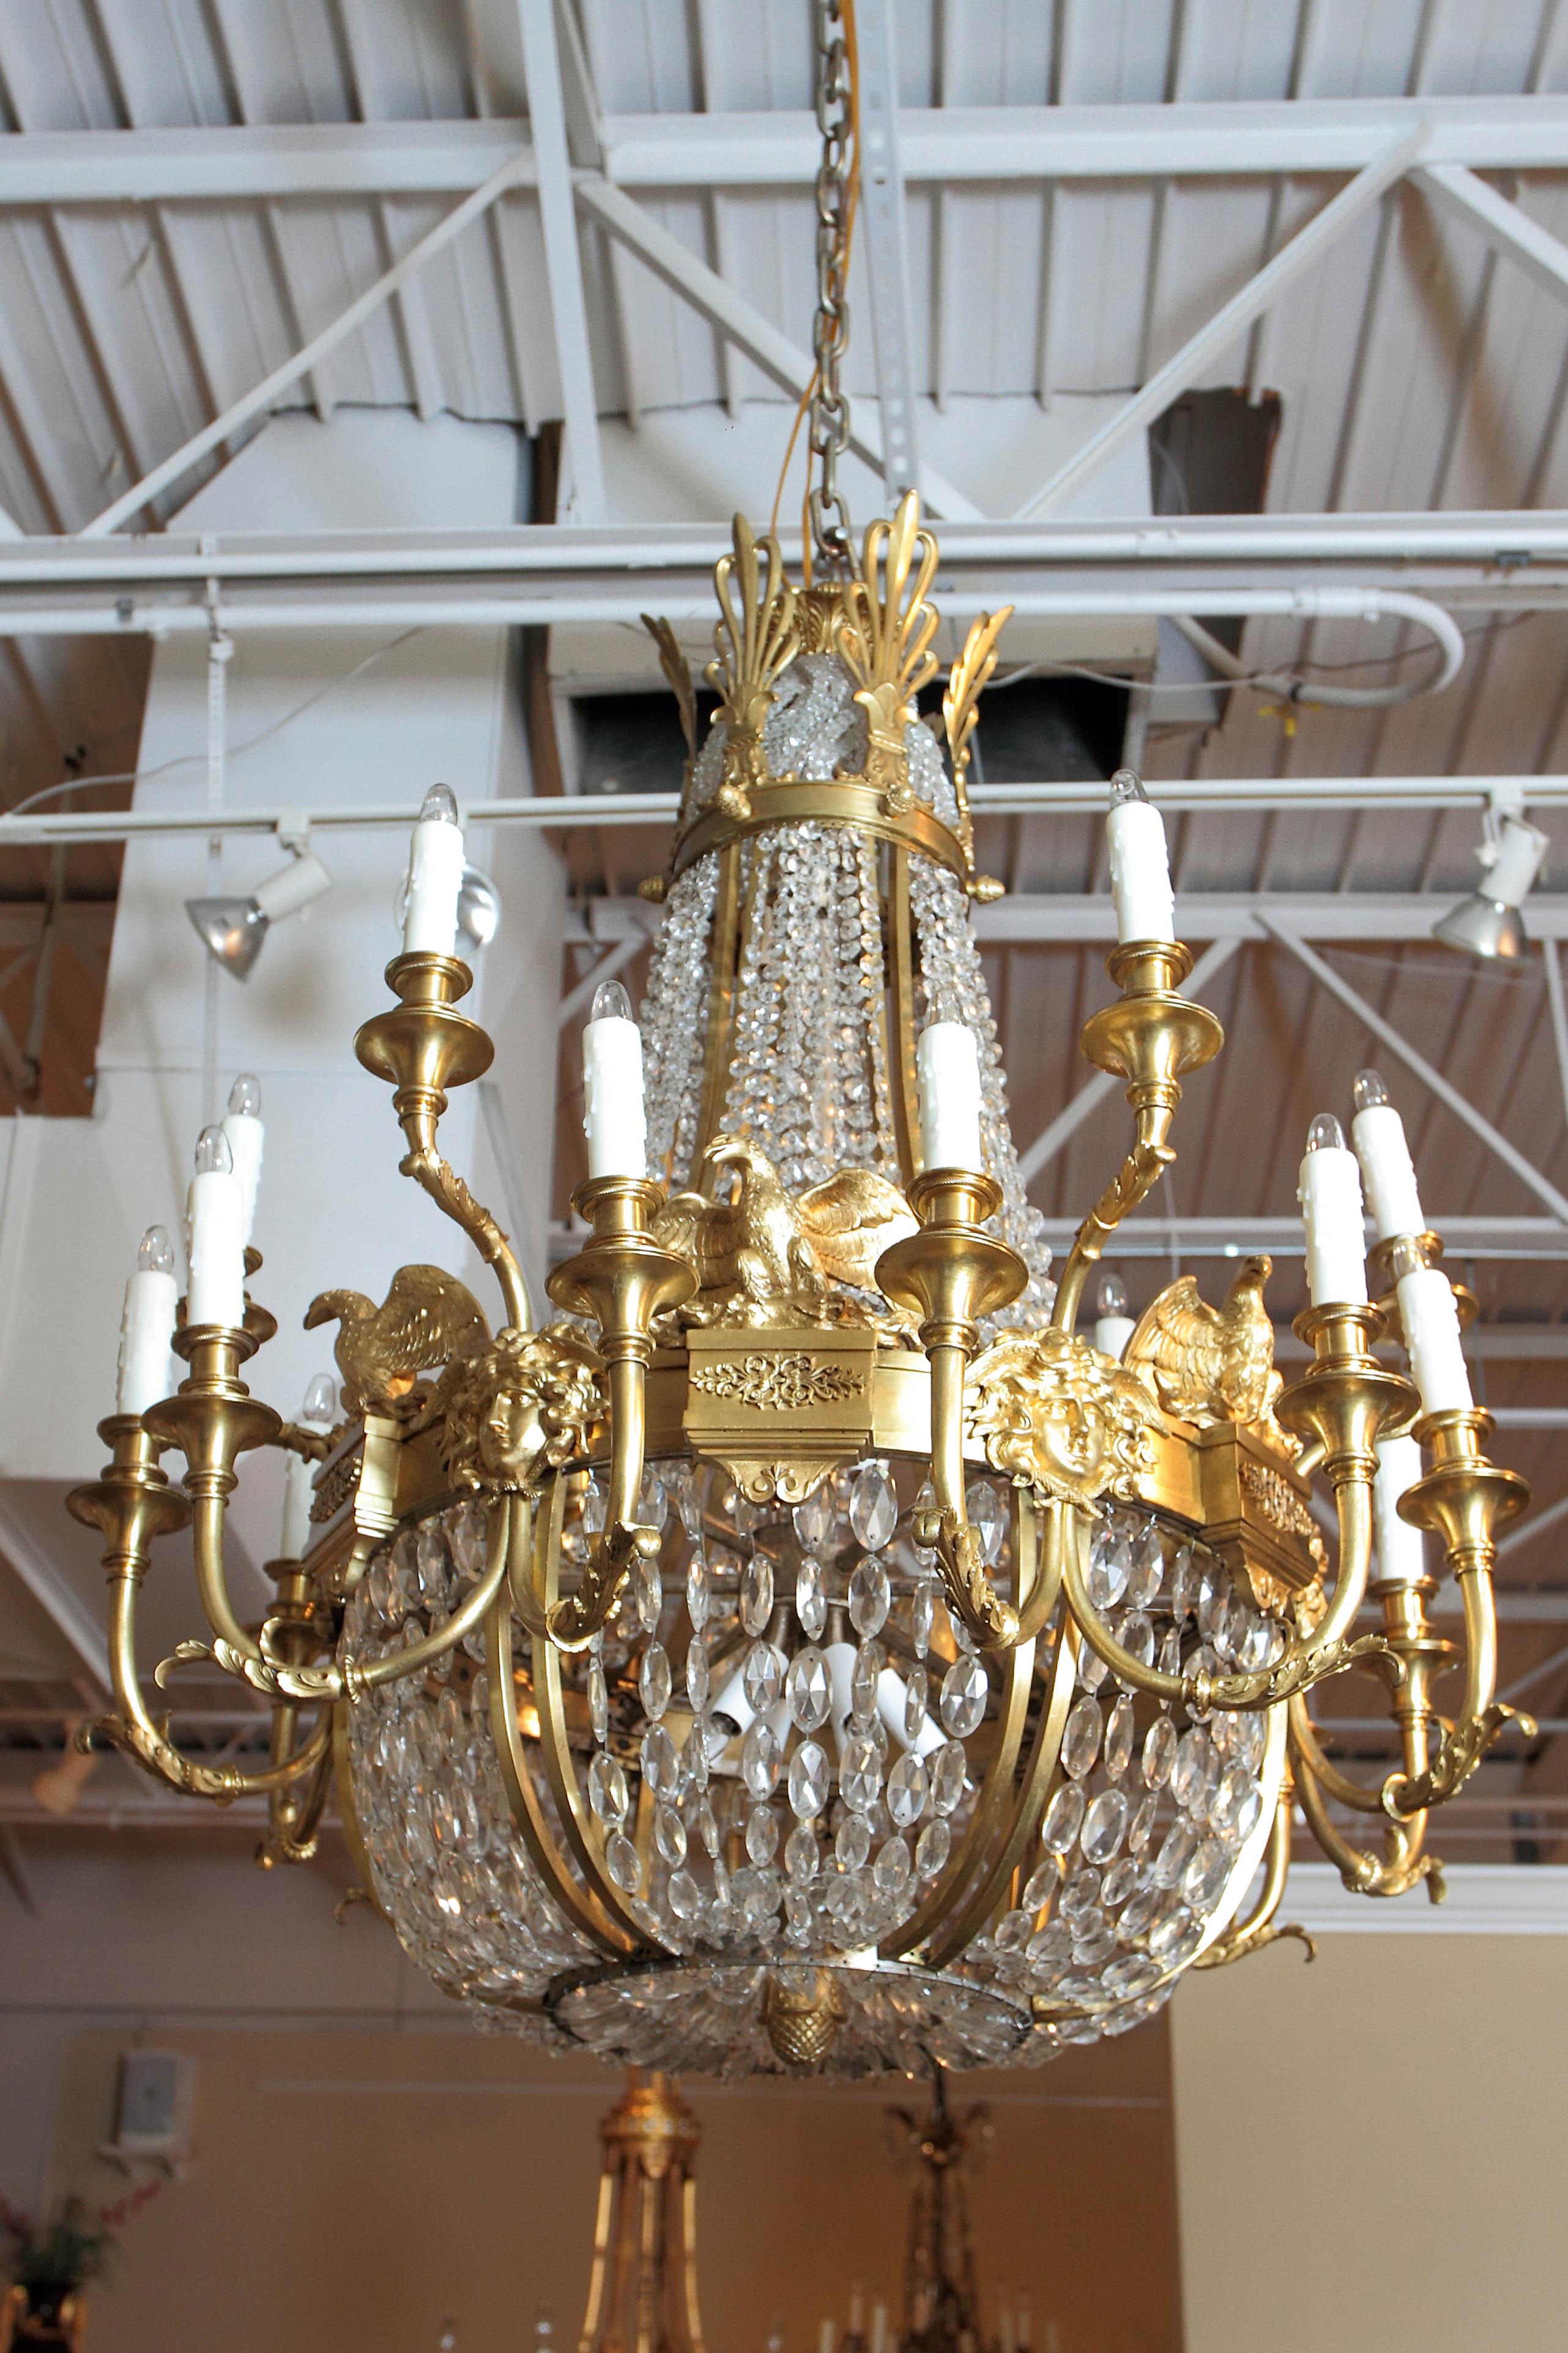 Late 19th century to Early 20th century American Empire cut crystal and gilt bronze chandelier. Fine gilt bronze Eagles atop a beautiful band of gilt bronze decoration with female faces. Adorned with 29 lights on the inside and the outside